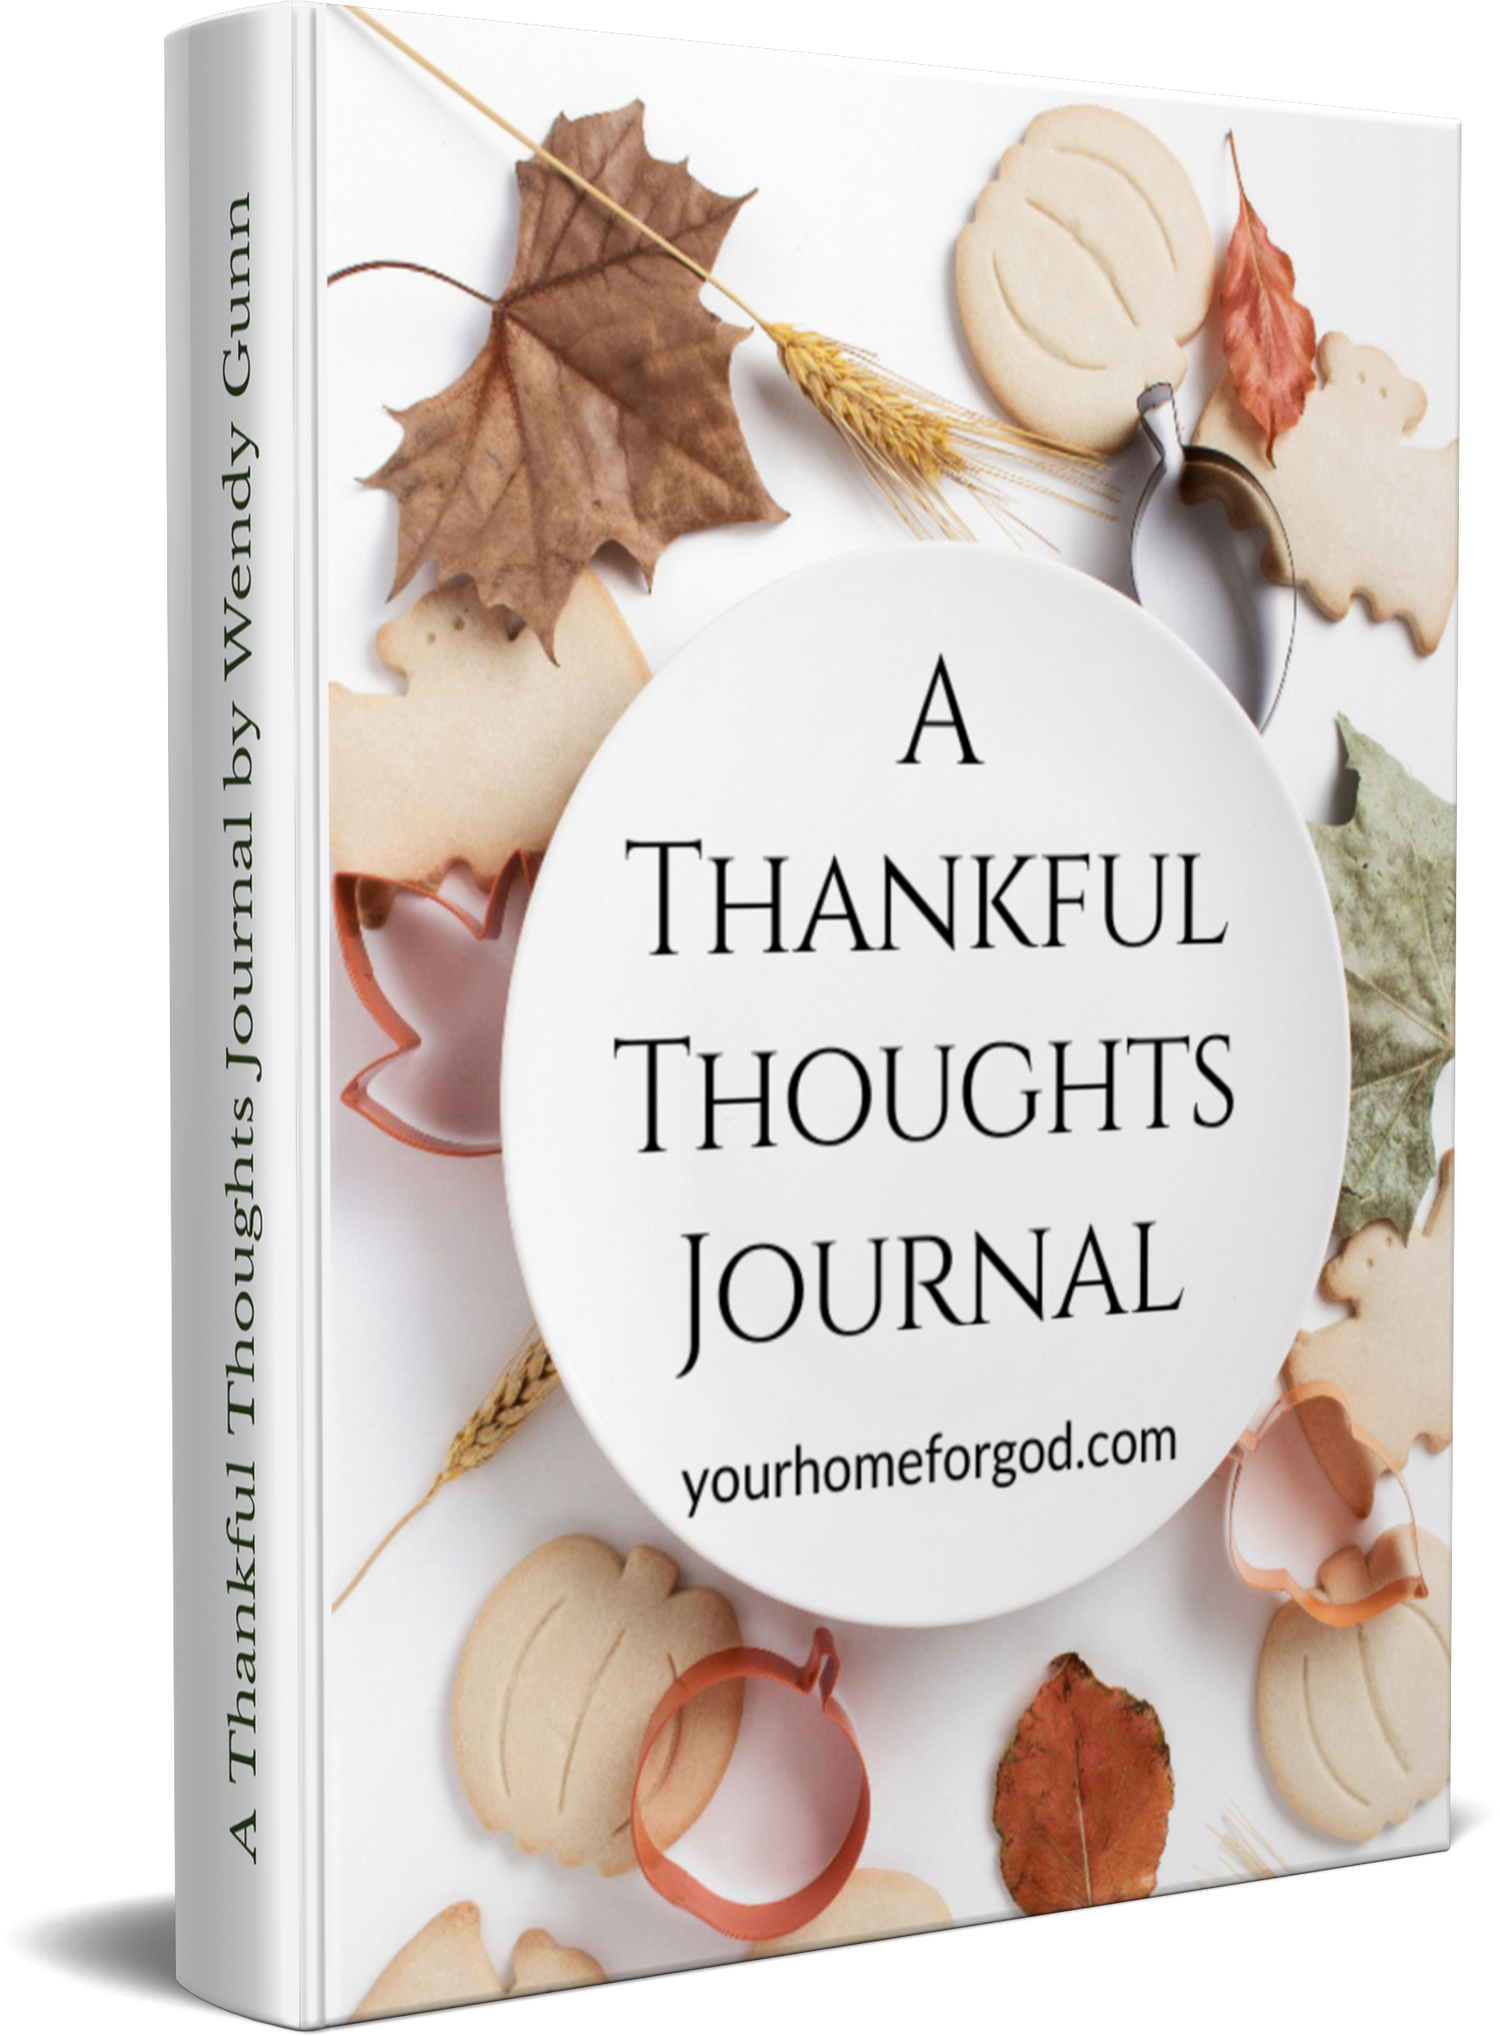 A Thankful Thoughts Journal